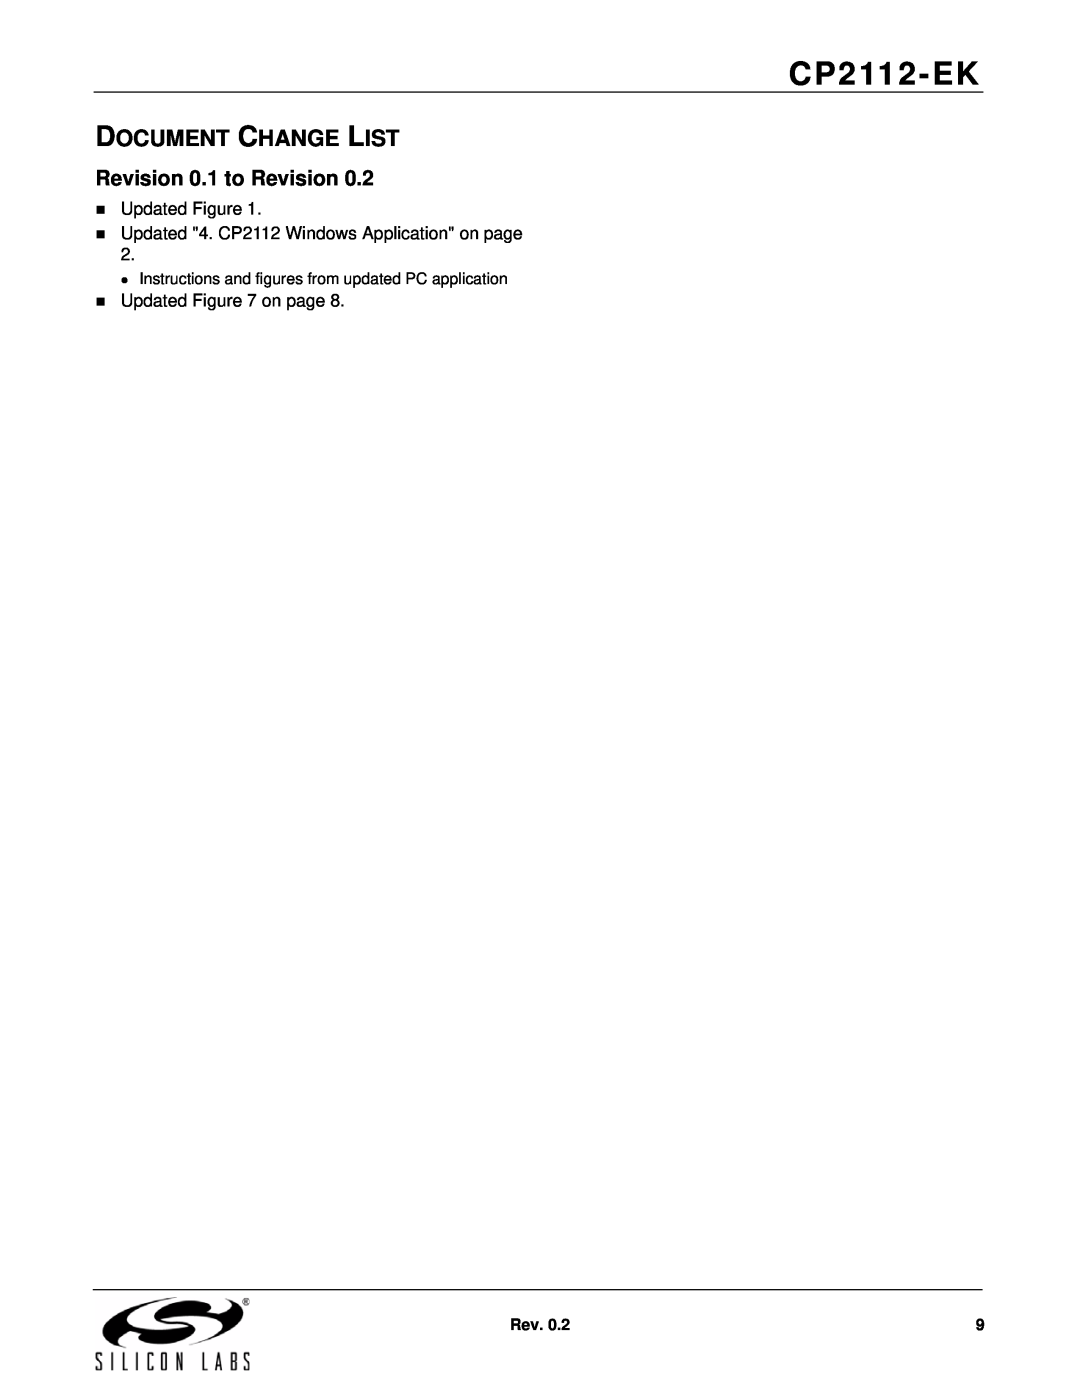 Silicon Laboratories CP2112-EK manual Document Change List, Revision 0.1 to Revision 